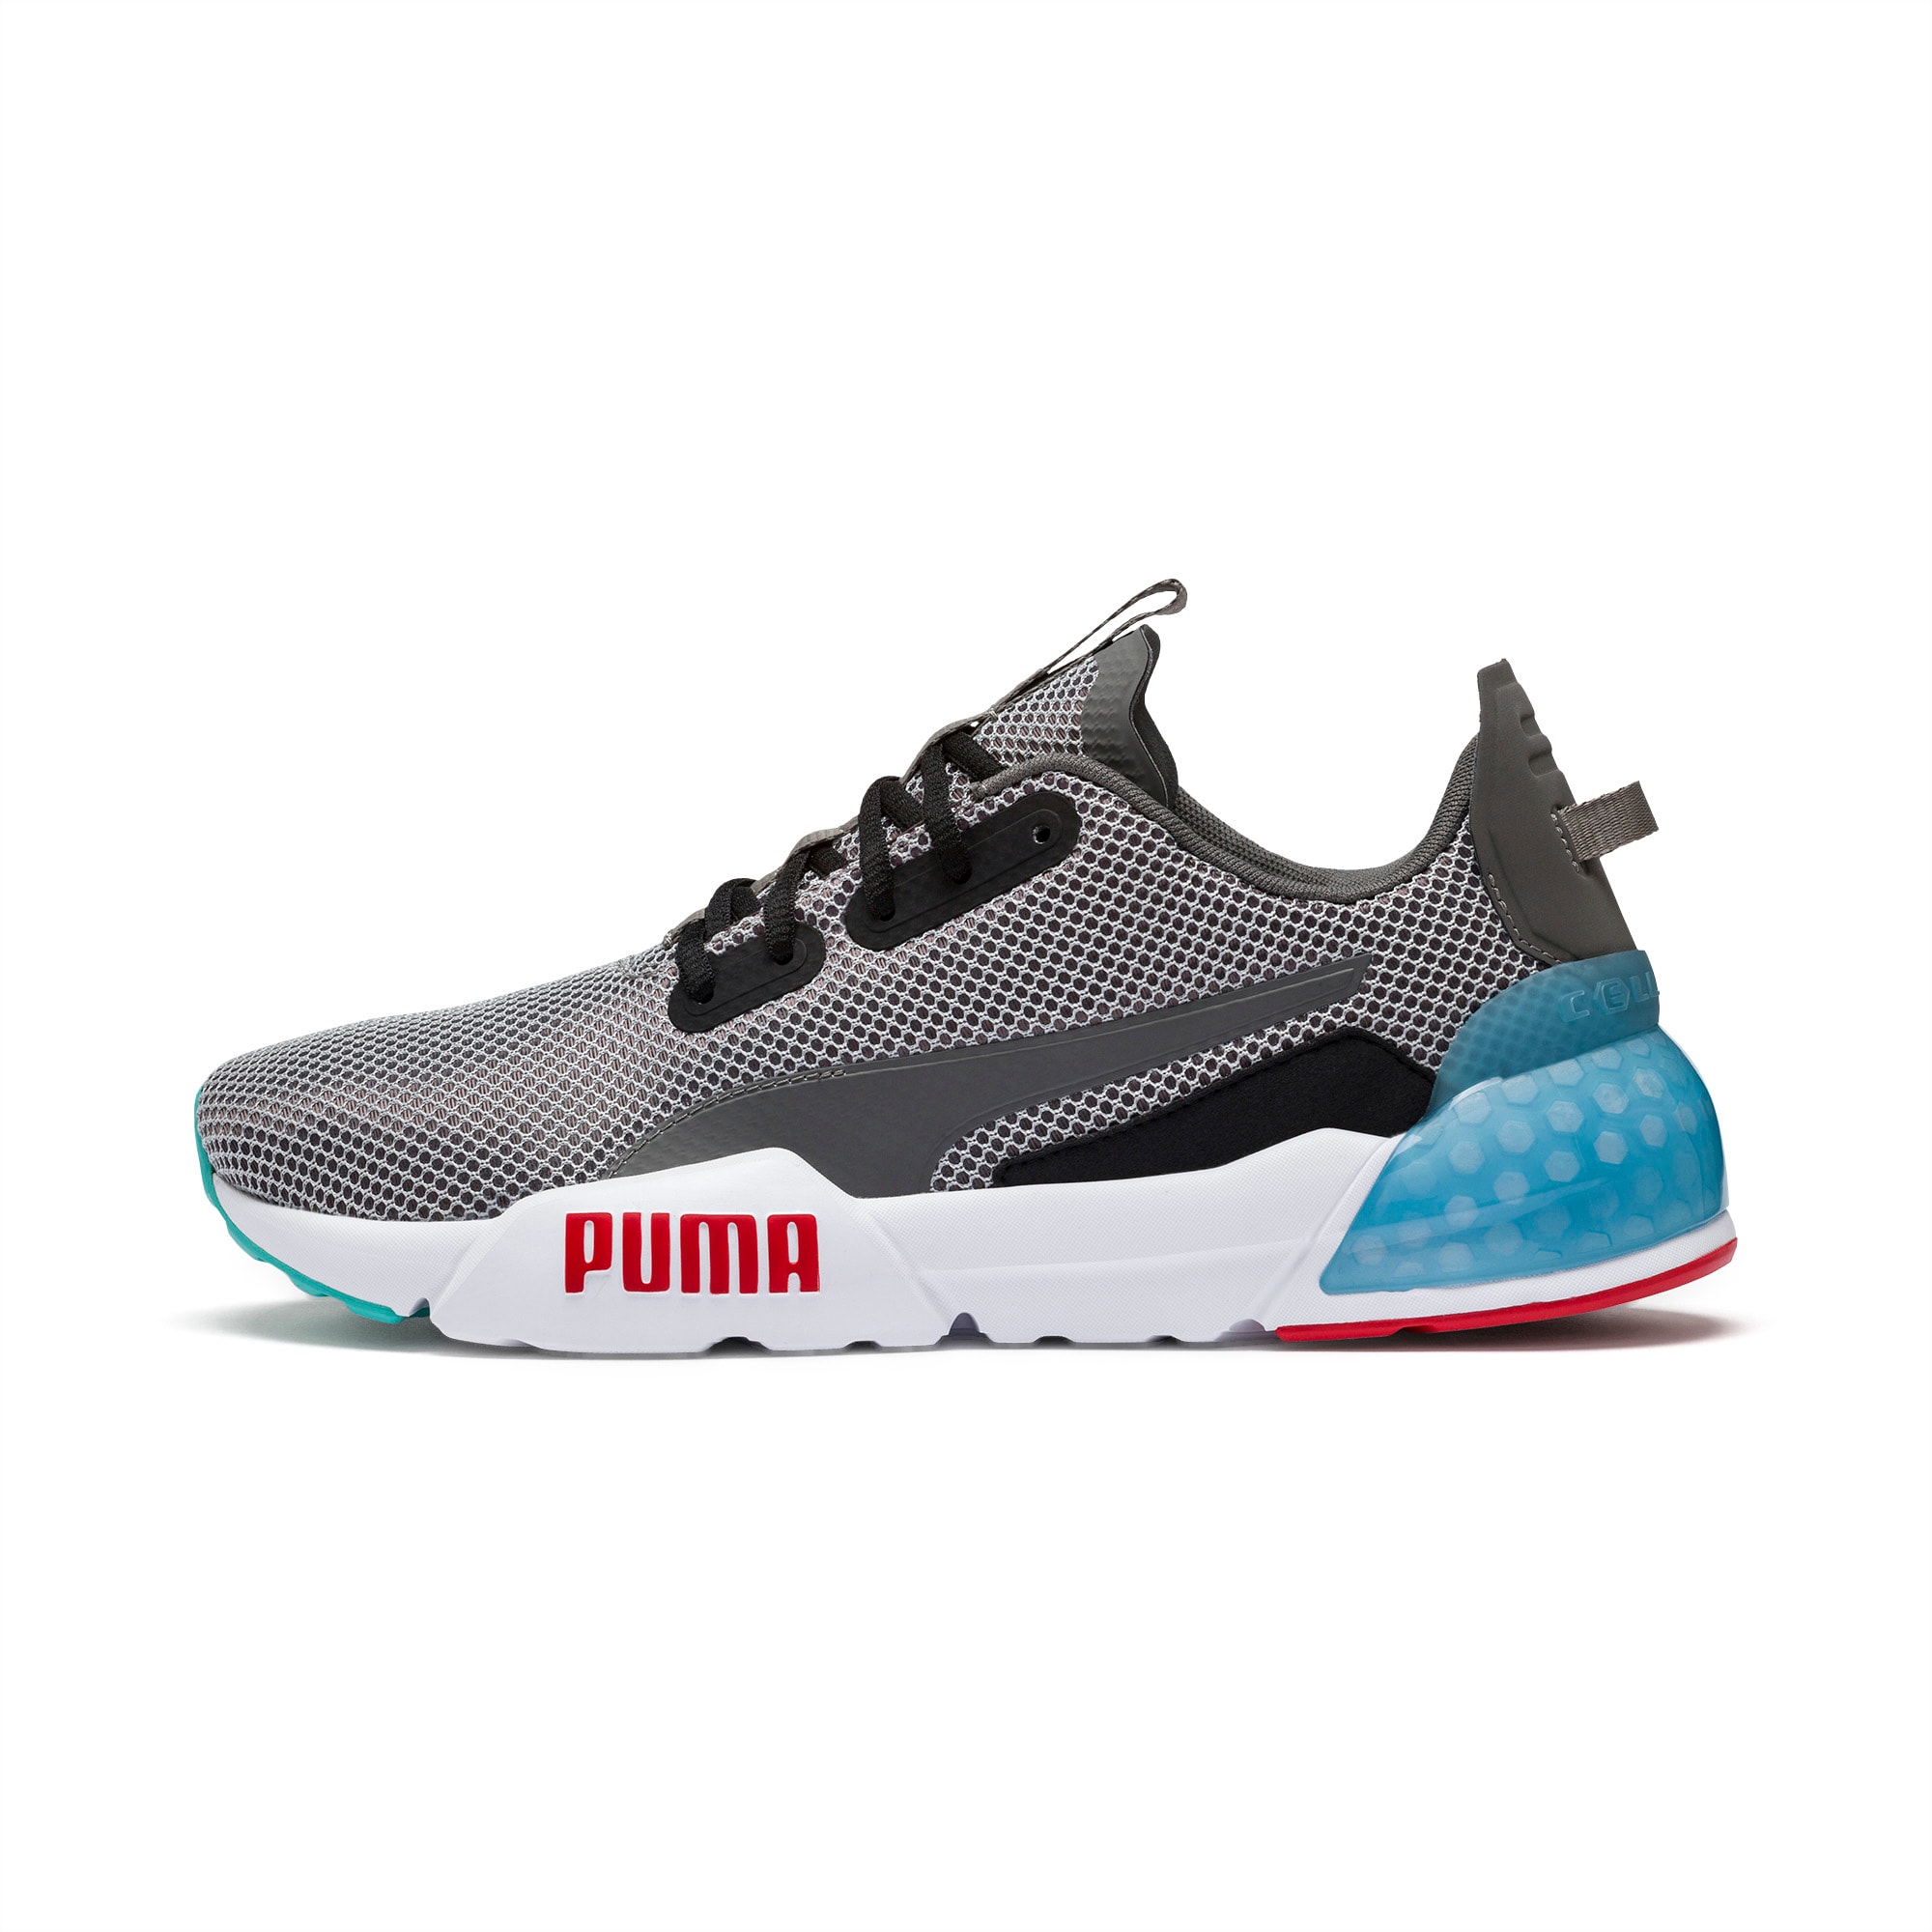 CELL Phase Men's Training Shoes | PUMA US